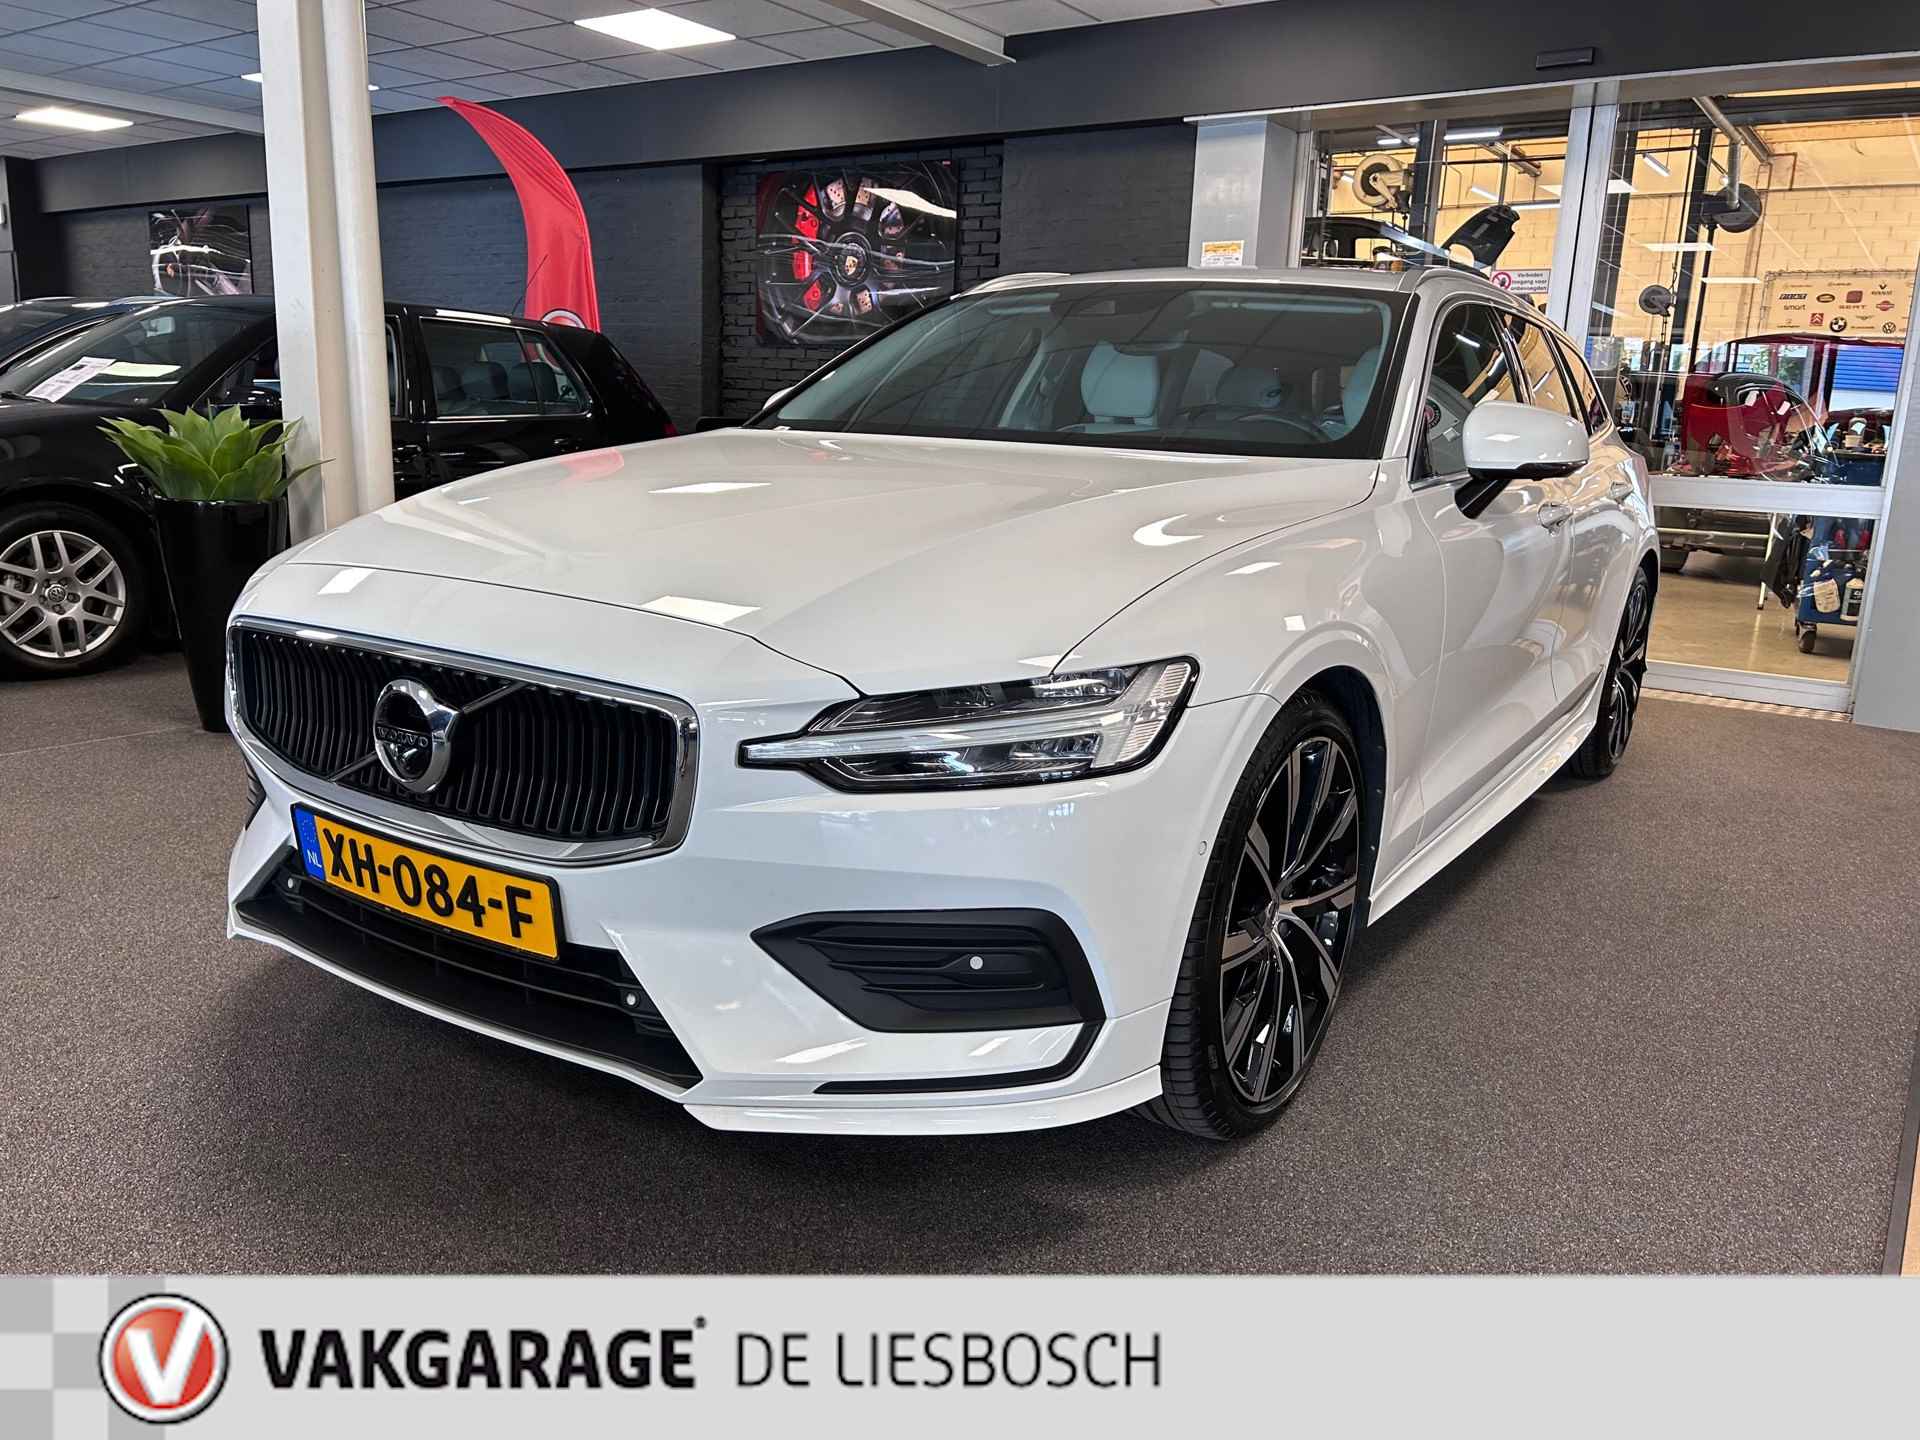 Volvo V60 2.0 T5 Momentum/Styling kit/Automaat/Led/20inch/360 camera - 11/34